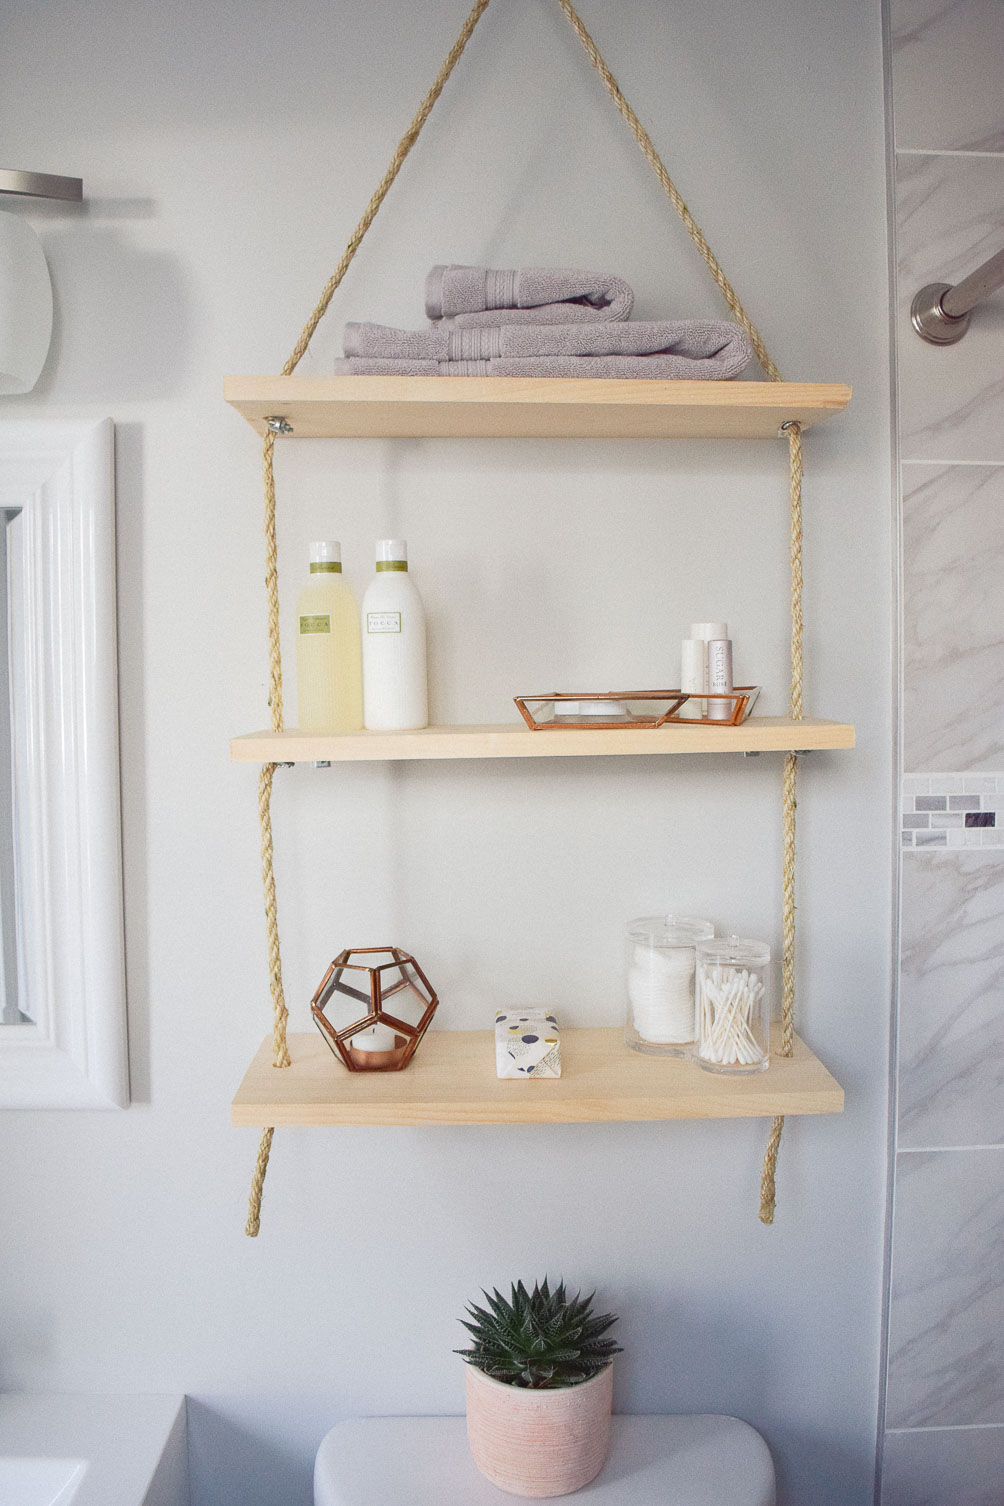 sharing an idea to update home decor with diy hanging shelves for bathroom storage